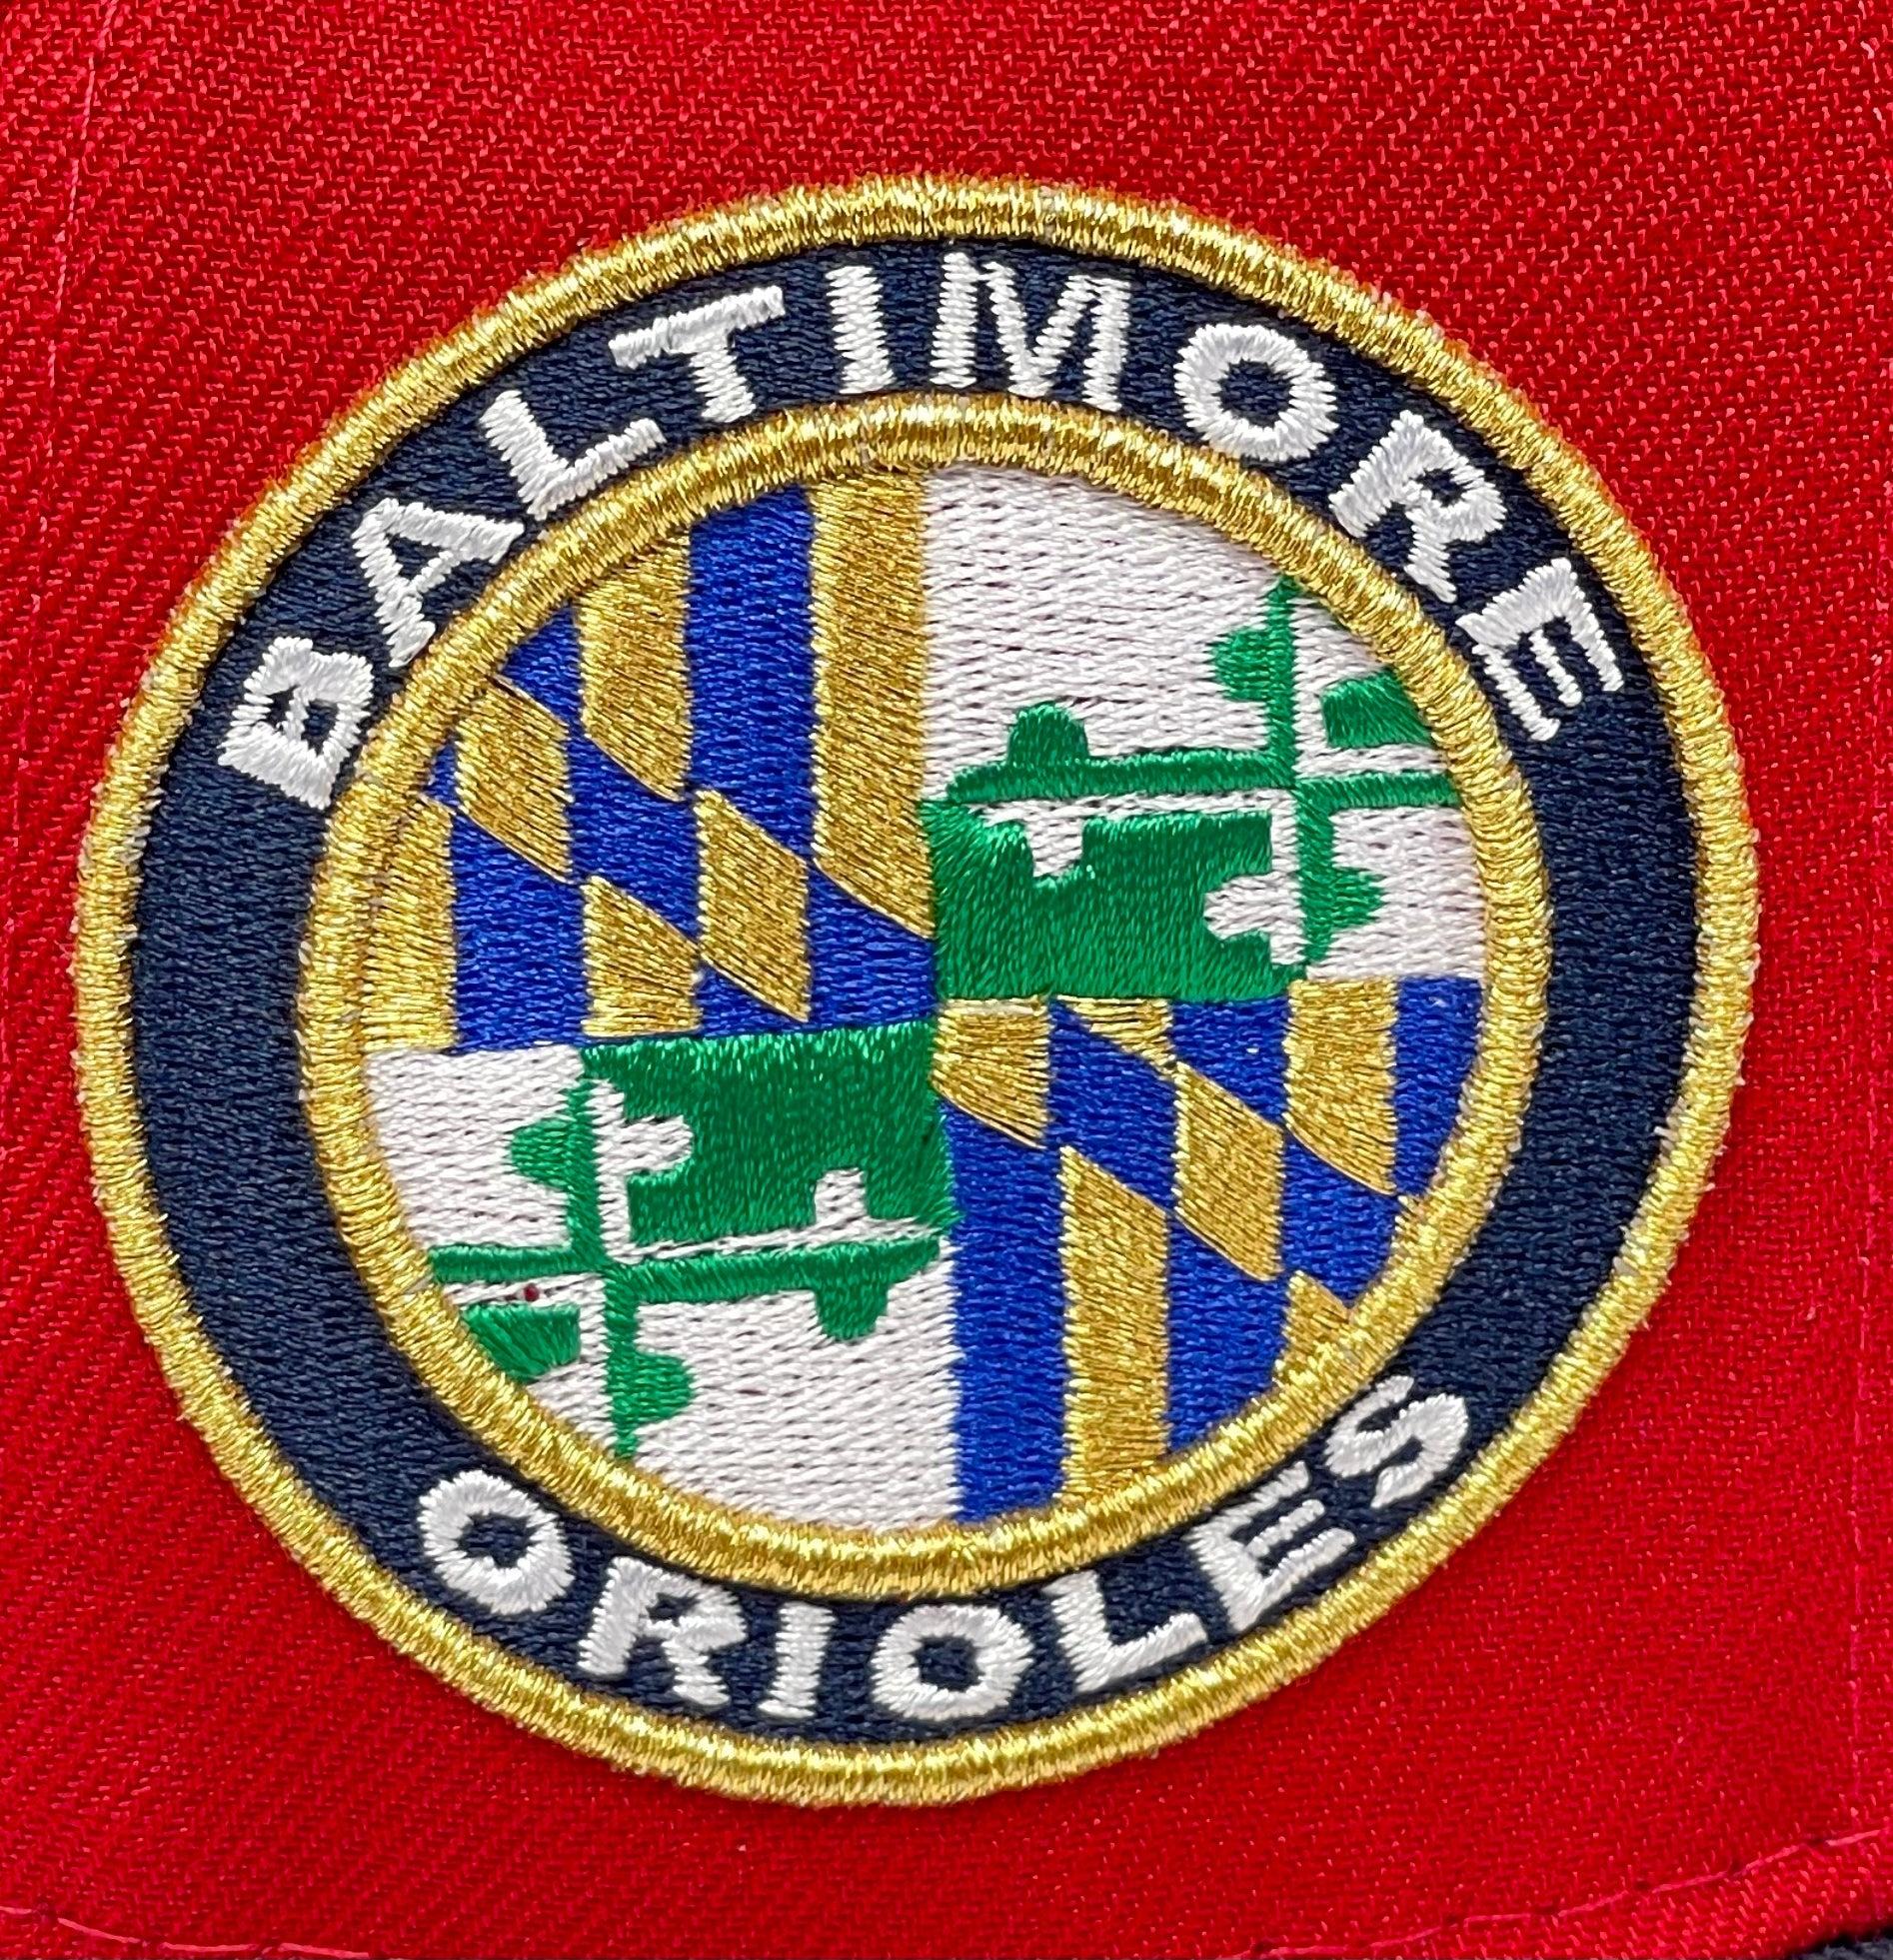 BALTIMORE ORIOLES CREST (RED) NEW ERA 59FIFTY EXCLUSIVE FITTED (PO)